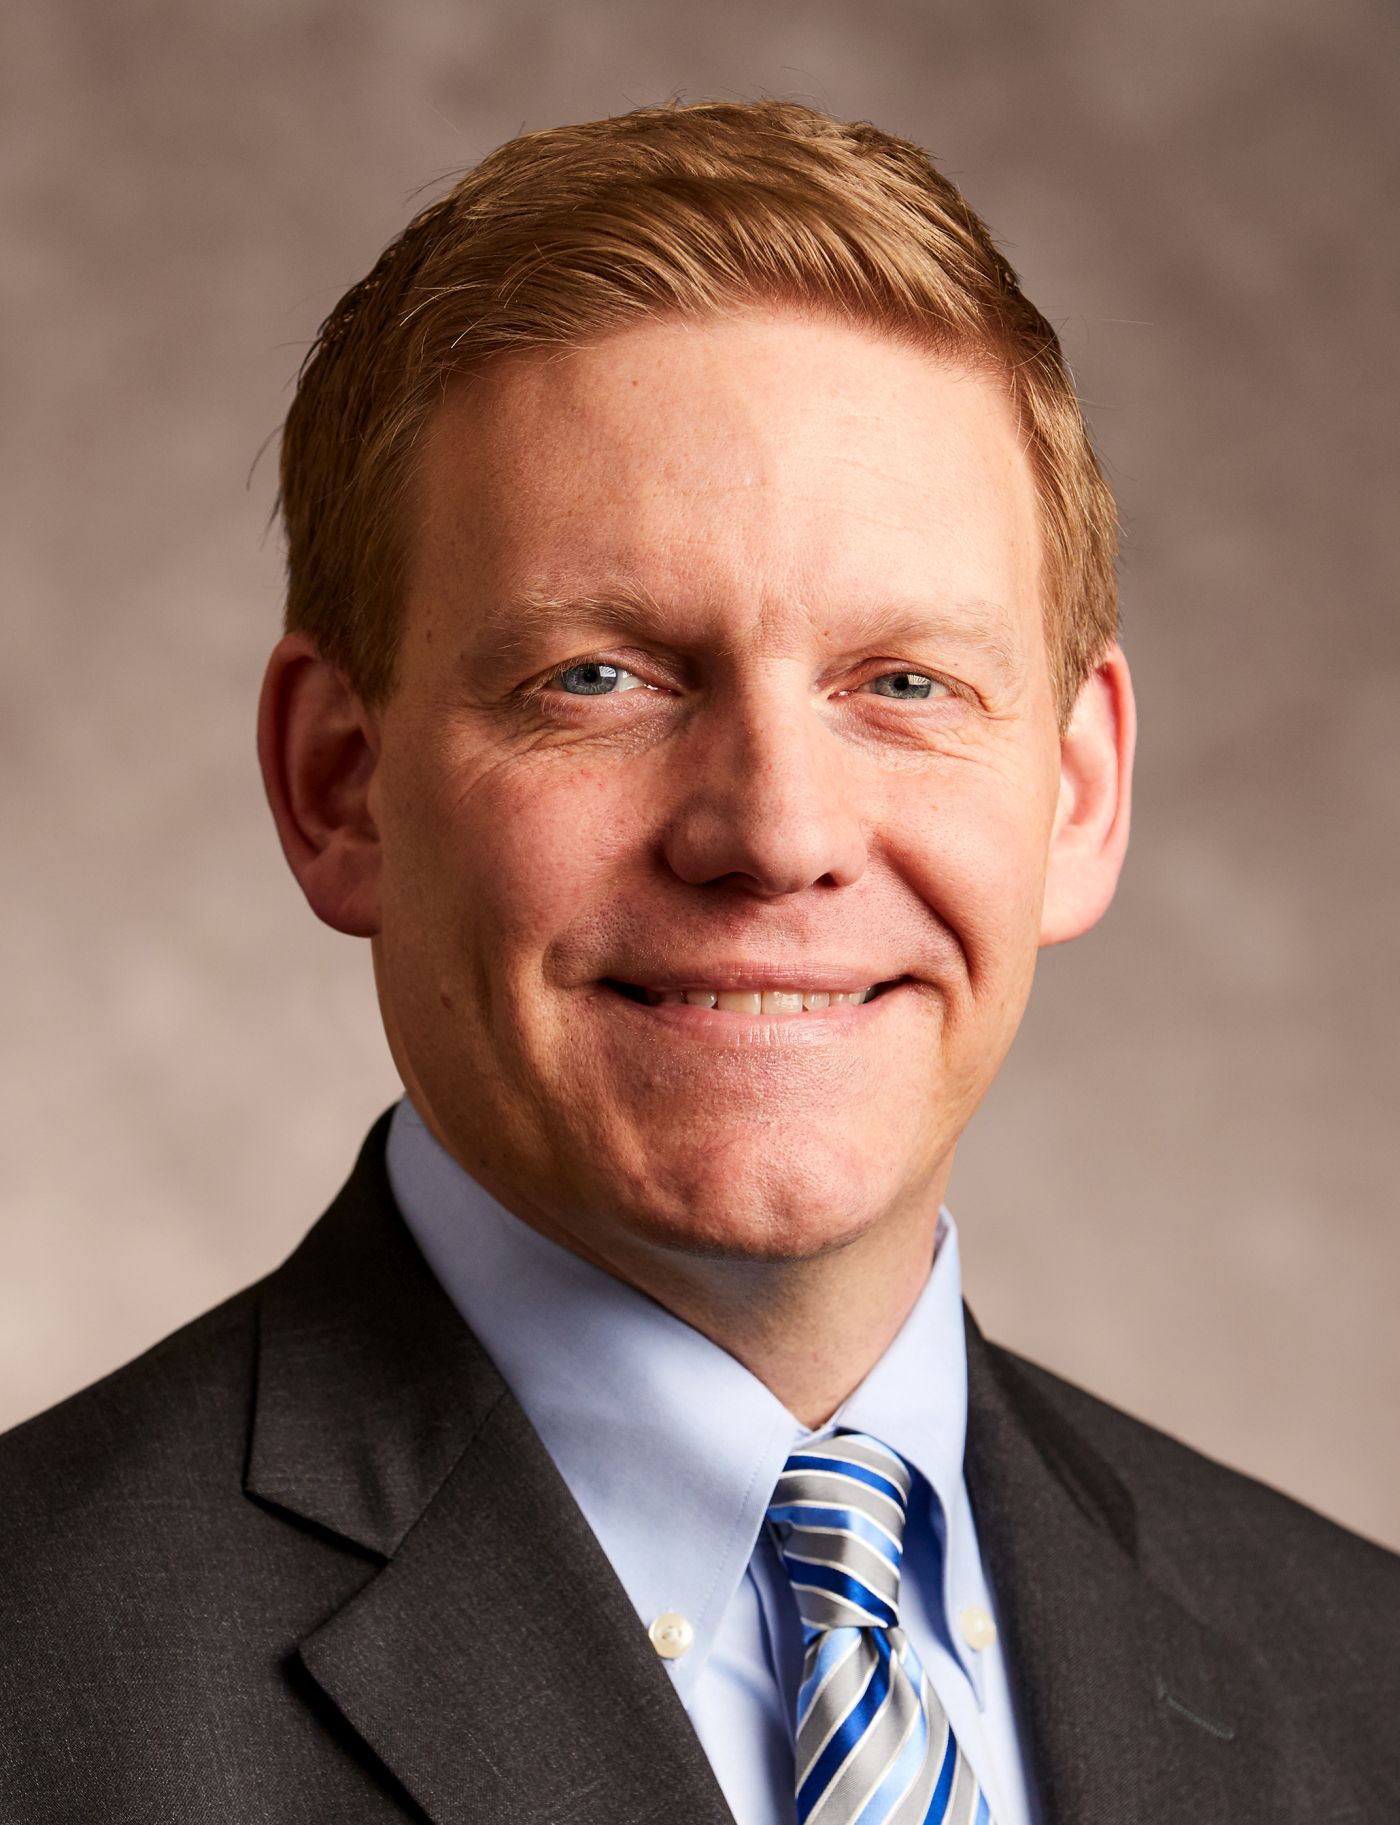 Daniel L. Kane, CFA, is a managing director of Artisan Partners and a portfolio manager on the U.S. Value team. In this role, he is a portfolio manager for the Artisan Value Equity, U.S. Mid-Cap Value and Value Income Strategies.